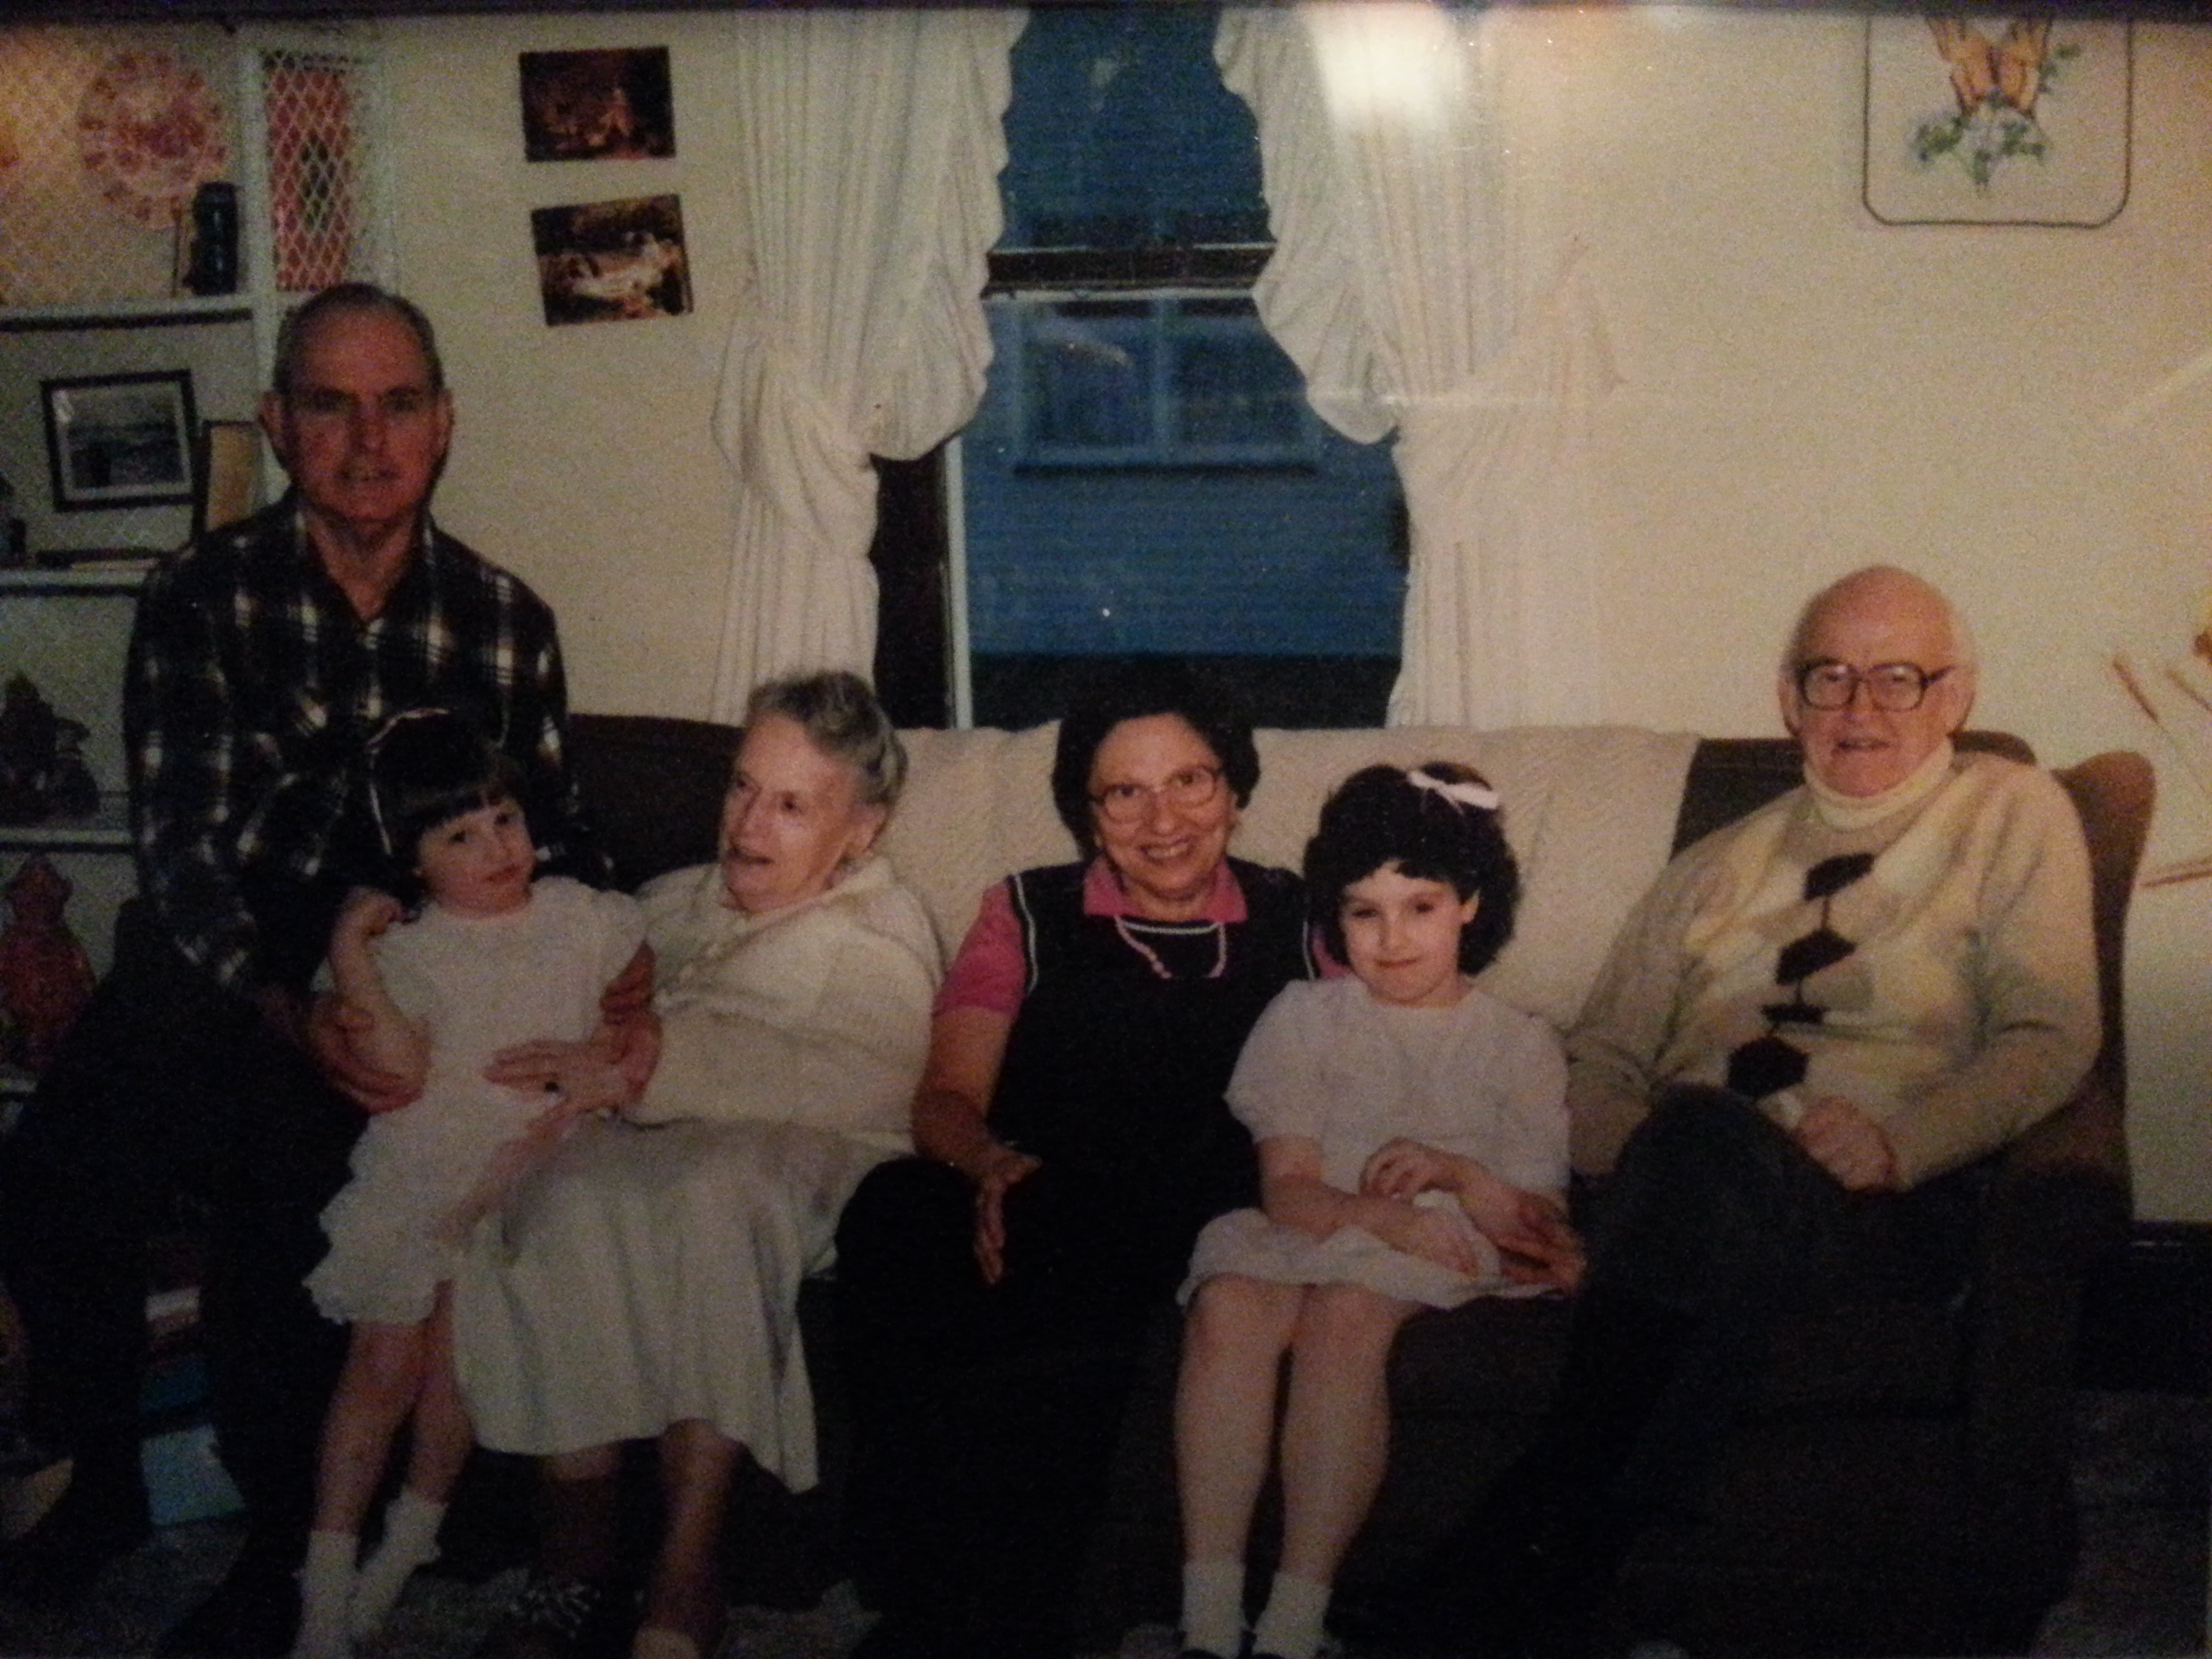 Melissa & I with both sets of Grandparents.  